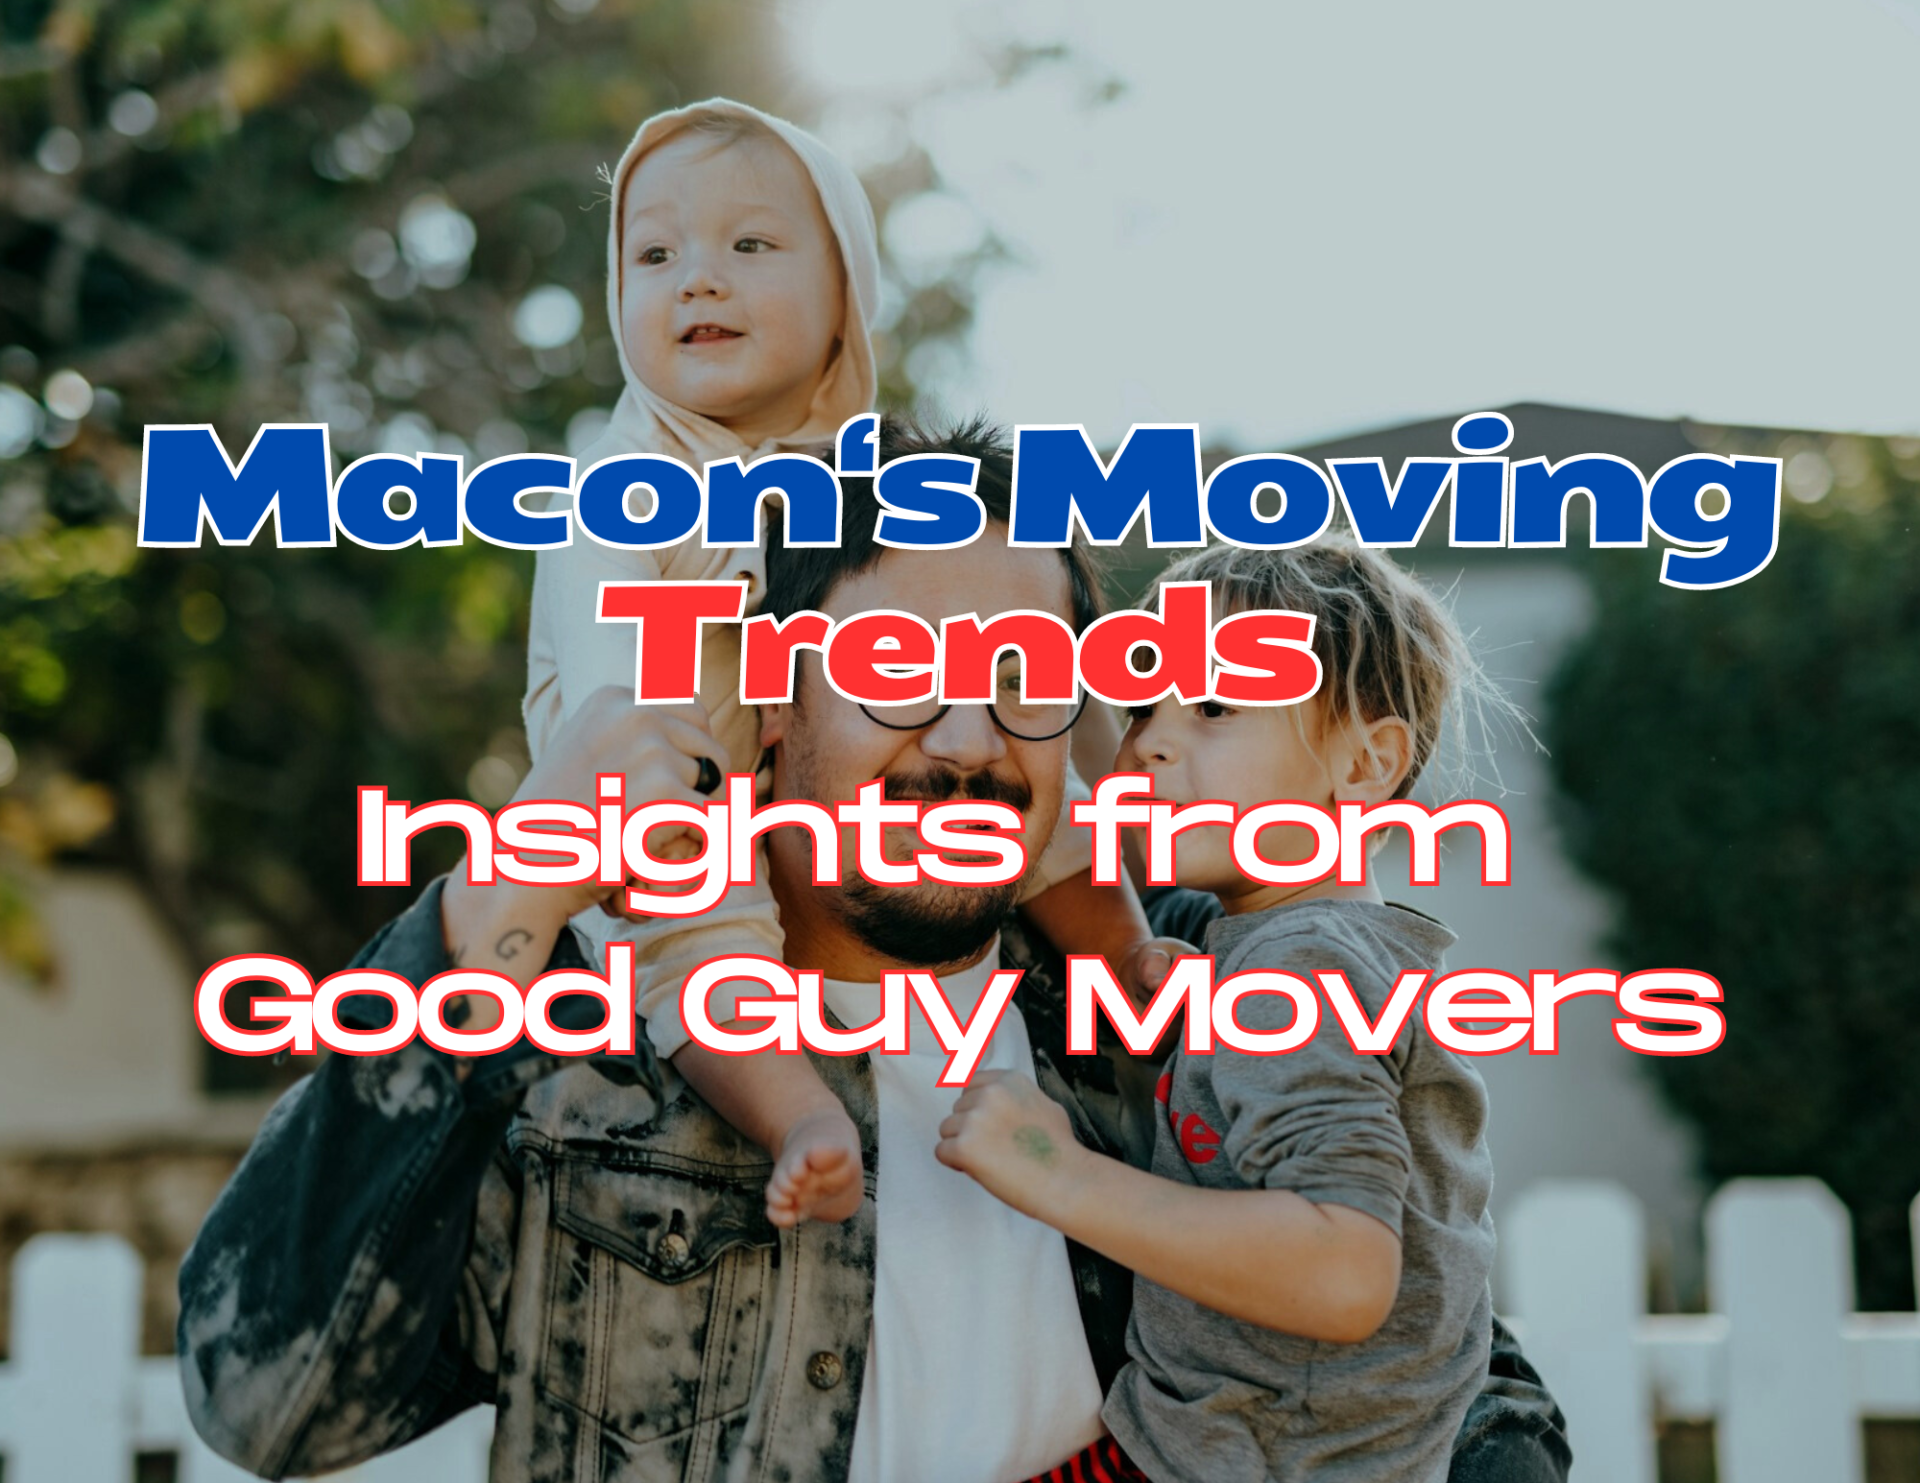 Macons Moving Trends Macon's Moving Trends: Insights from Good Guys Moving